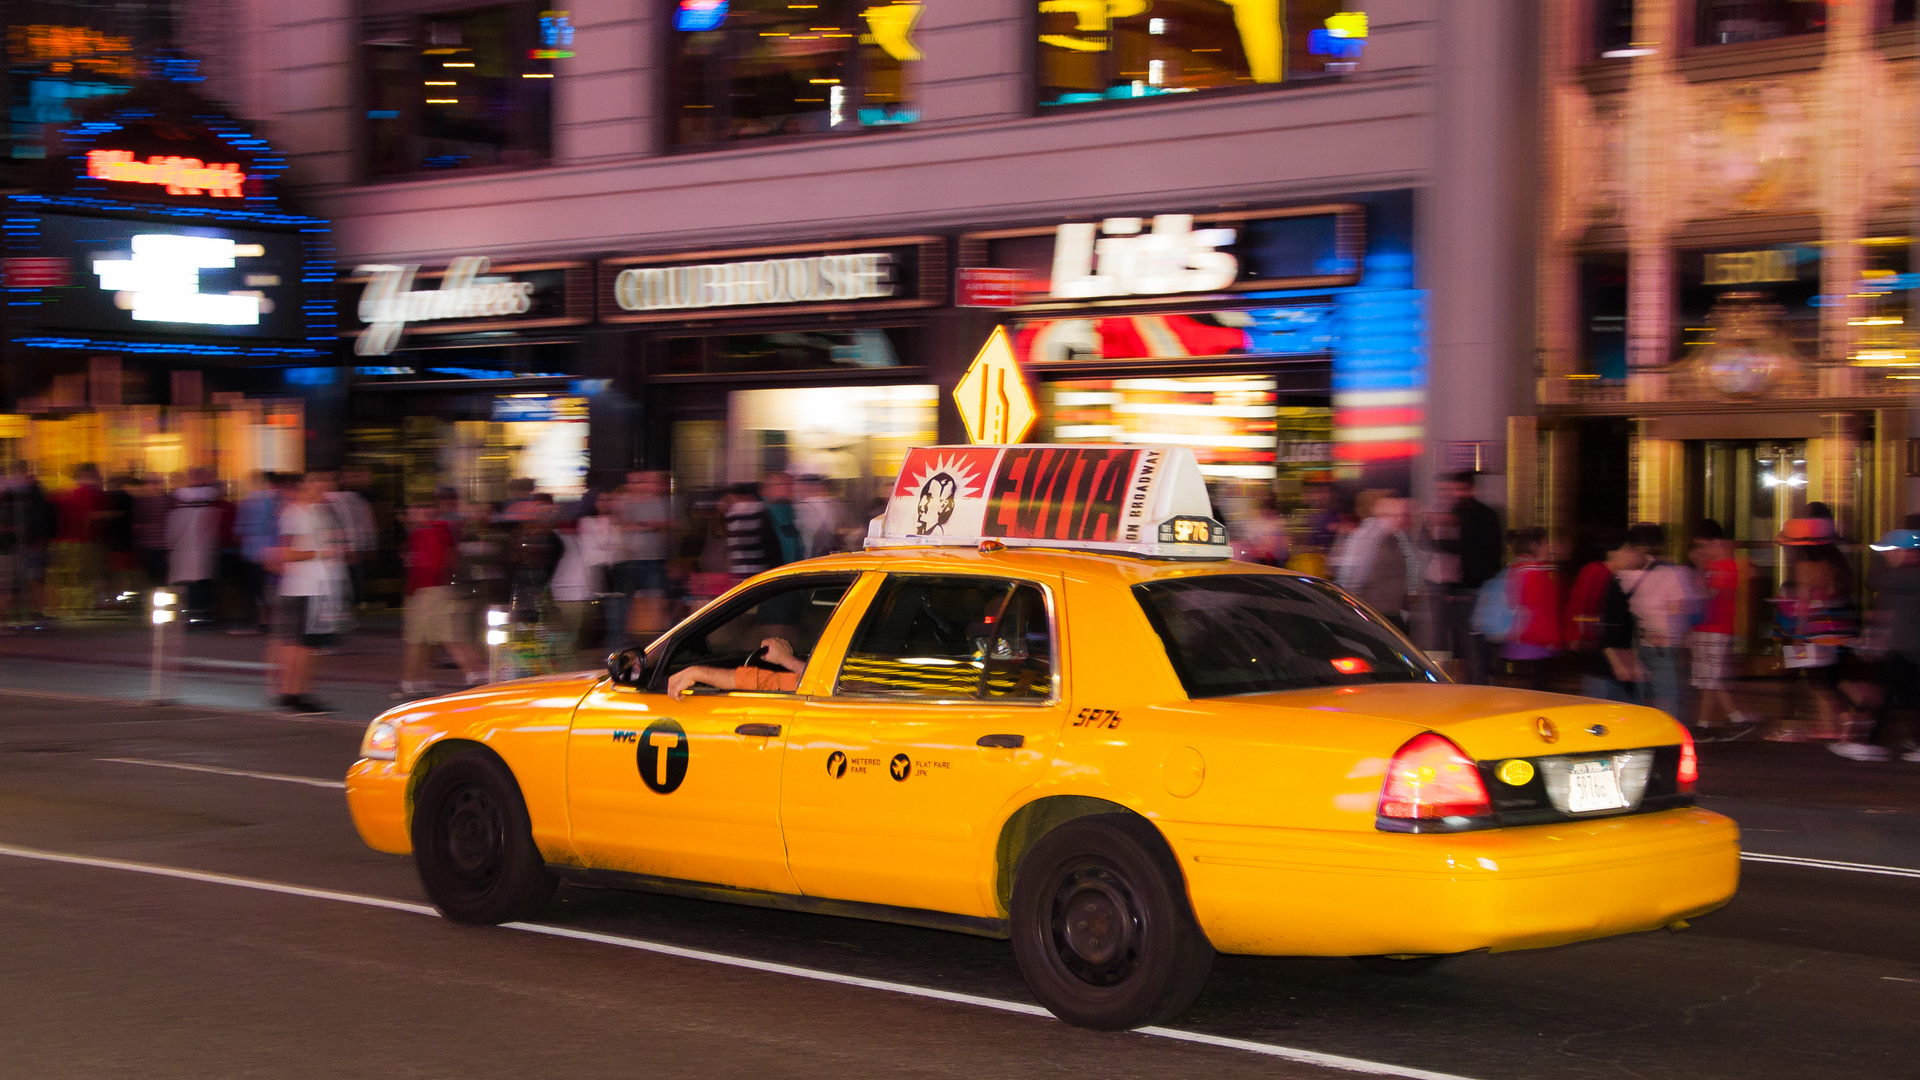 NYC Taxi @ Times Square